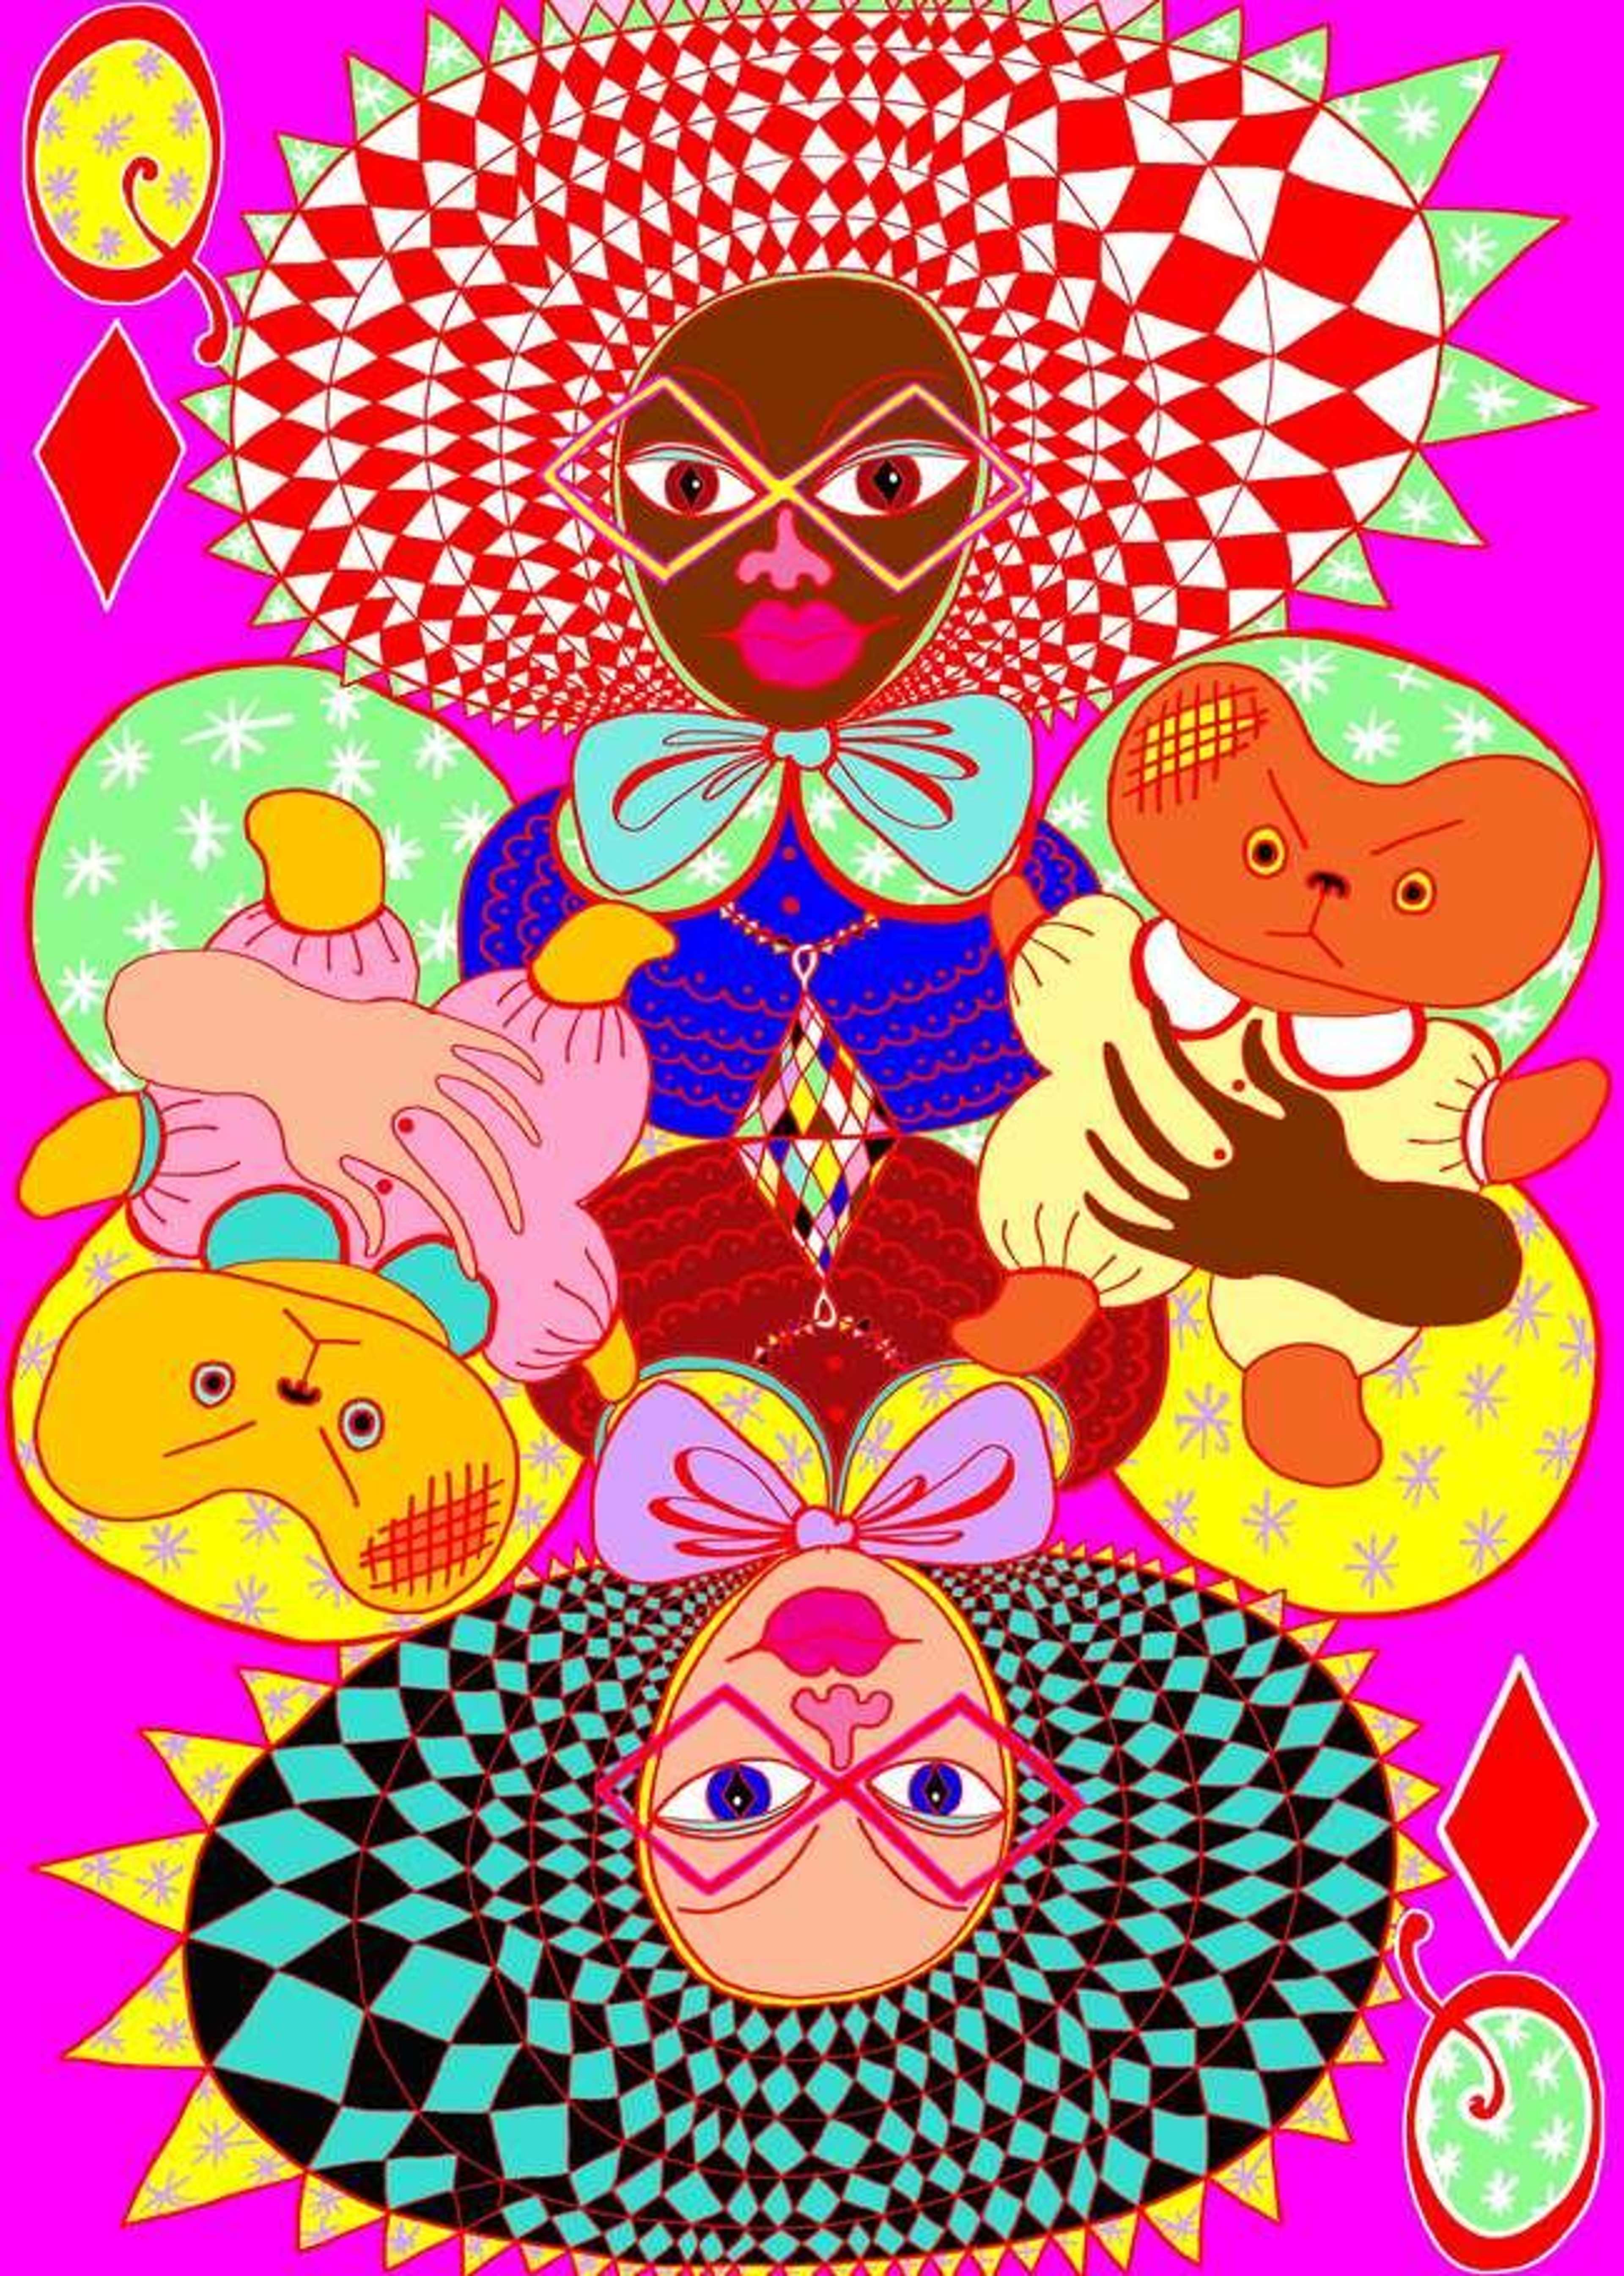 Colourful print by Grayson Perry depicting the Queen of Diamonds, in the format of a playing card, against a hot pick background.